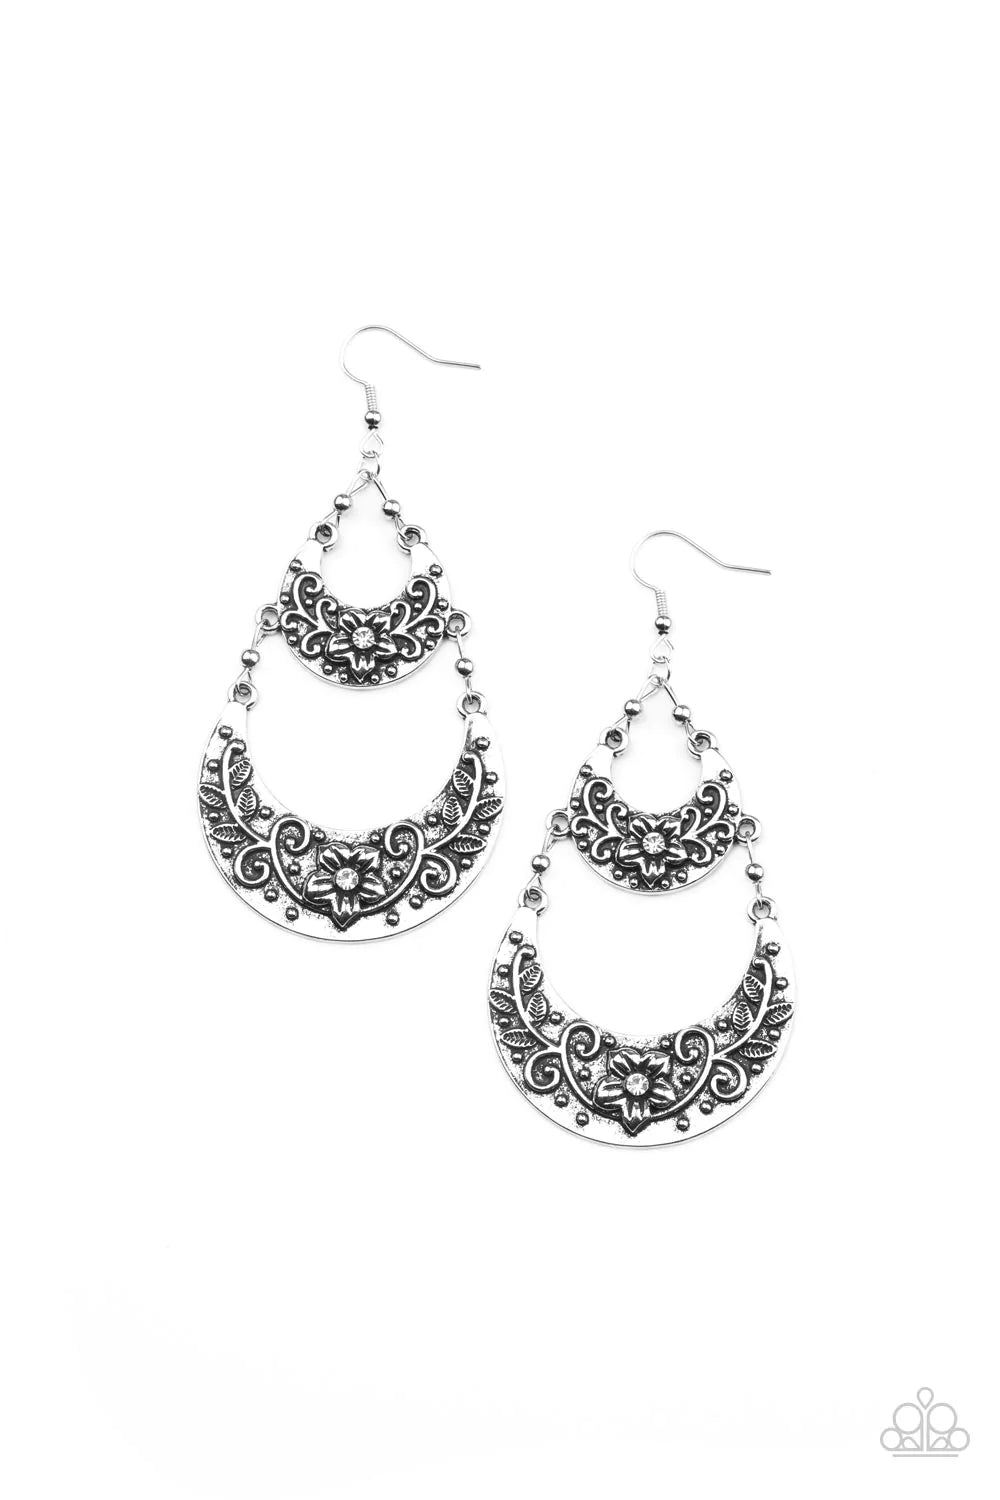 Paparazzi Accessories Springtime Gardens - White Dotted with dainty white rhinestone centers, studded silver half moon frames are embossed in leafy floral patterns as they link into a whimsical display. Earring attaches to a standard fishhook fitting. Sol